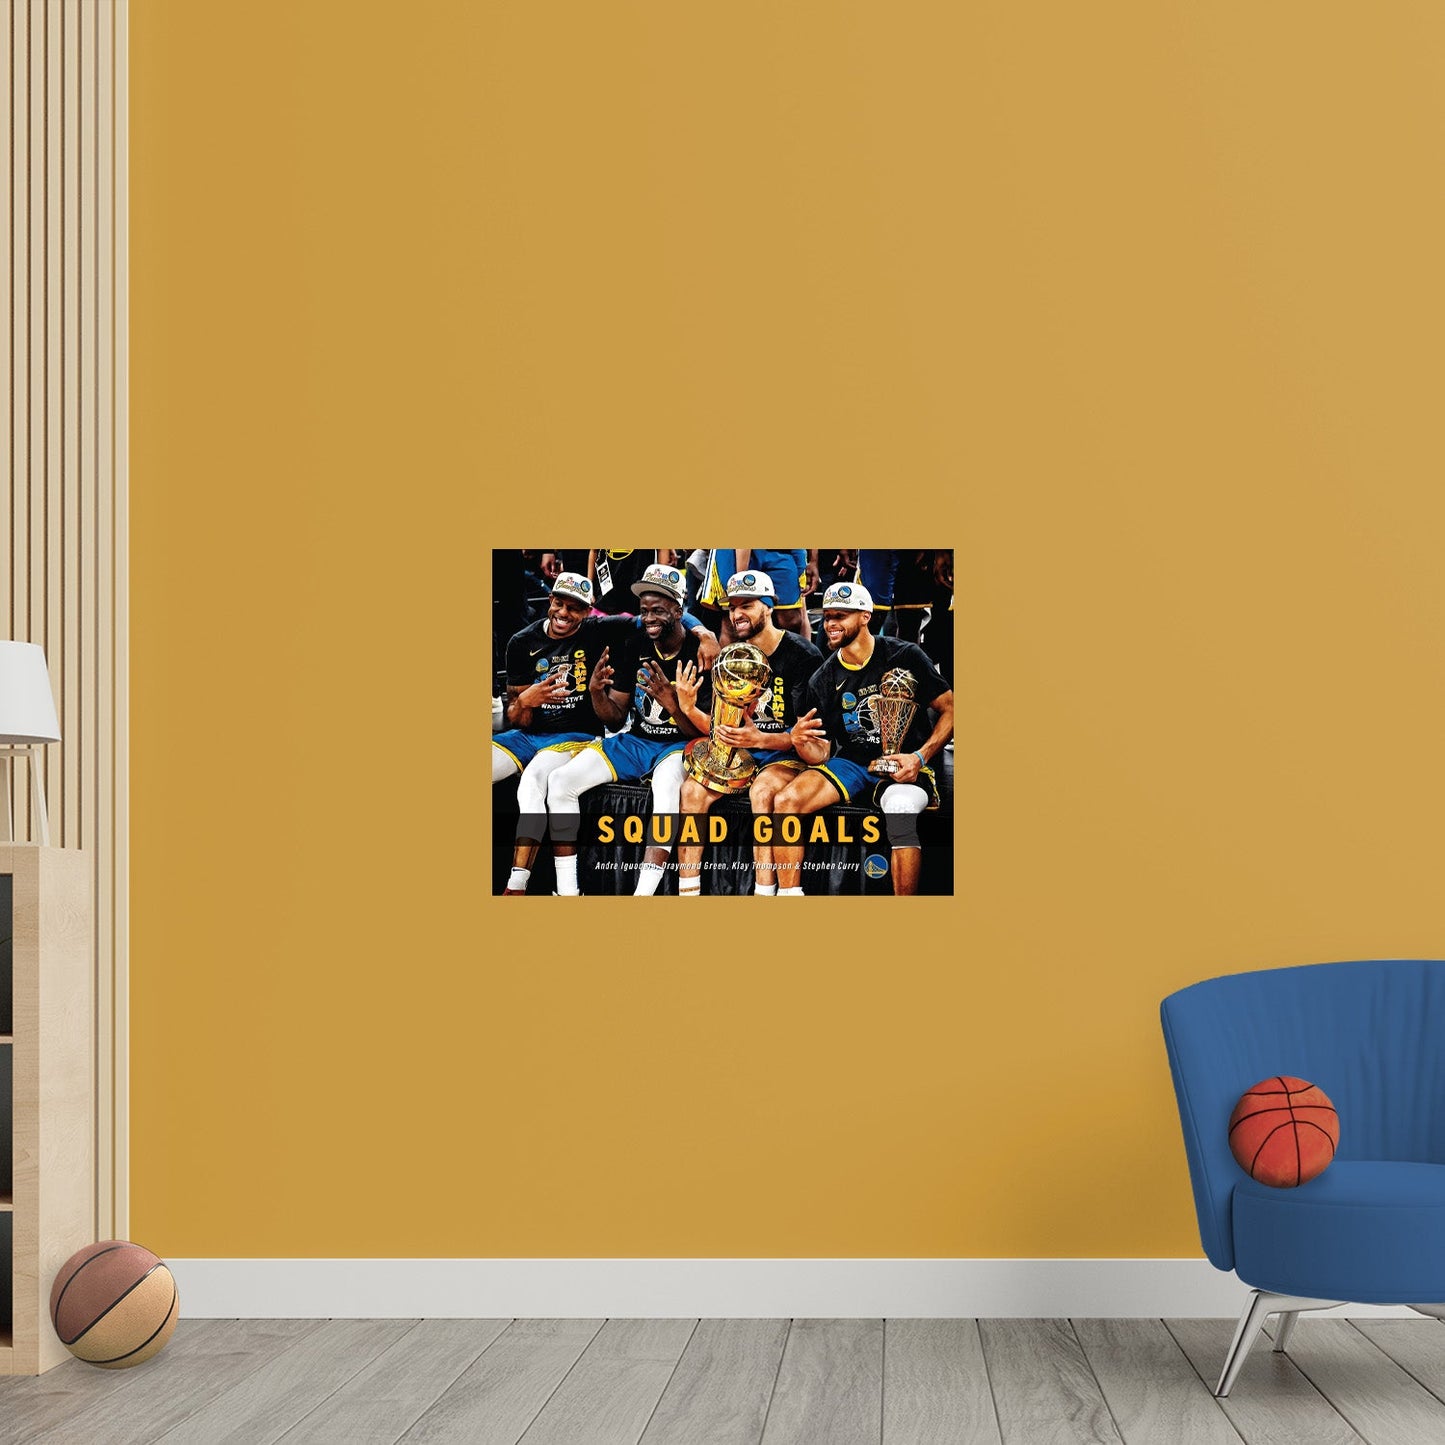 Golden State Warriors: Andre Iguodala, Draymond Green, Klay Thompson & Stephen Curry Motivational Poster - Officially Licensed NBA Removable Adhesive Decal